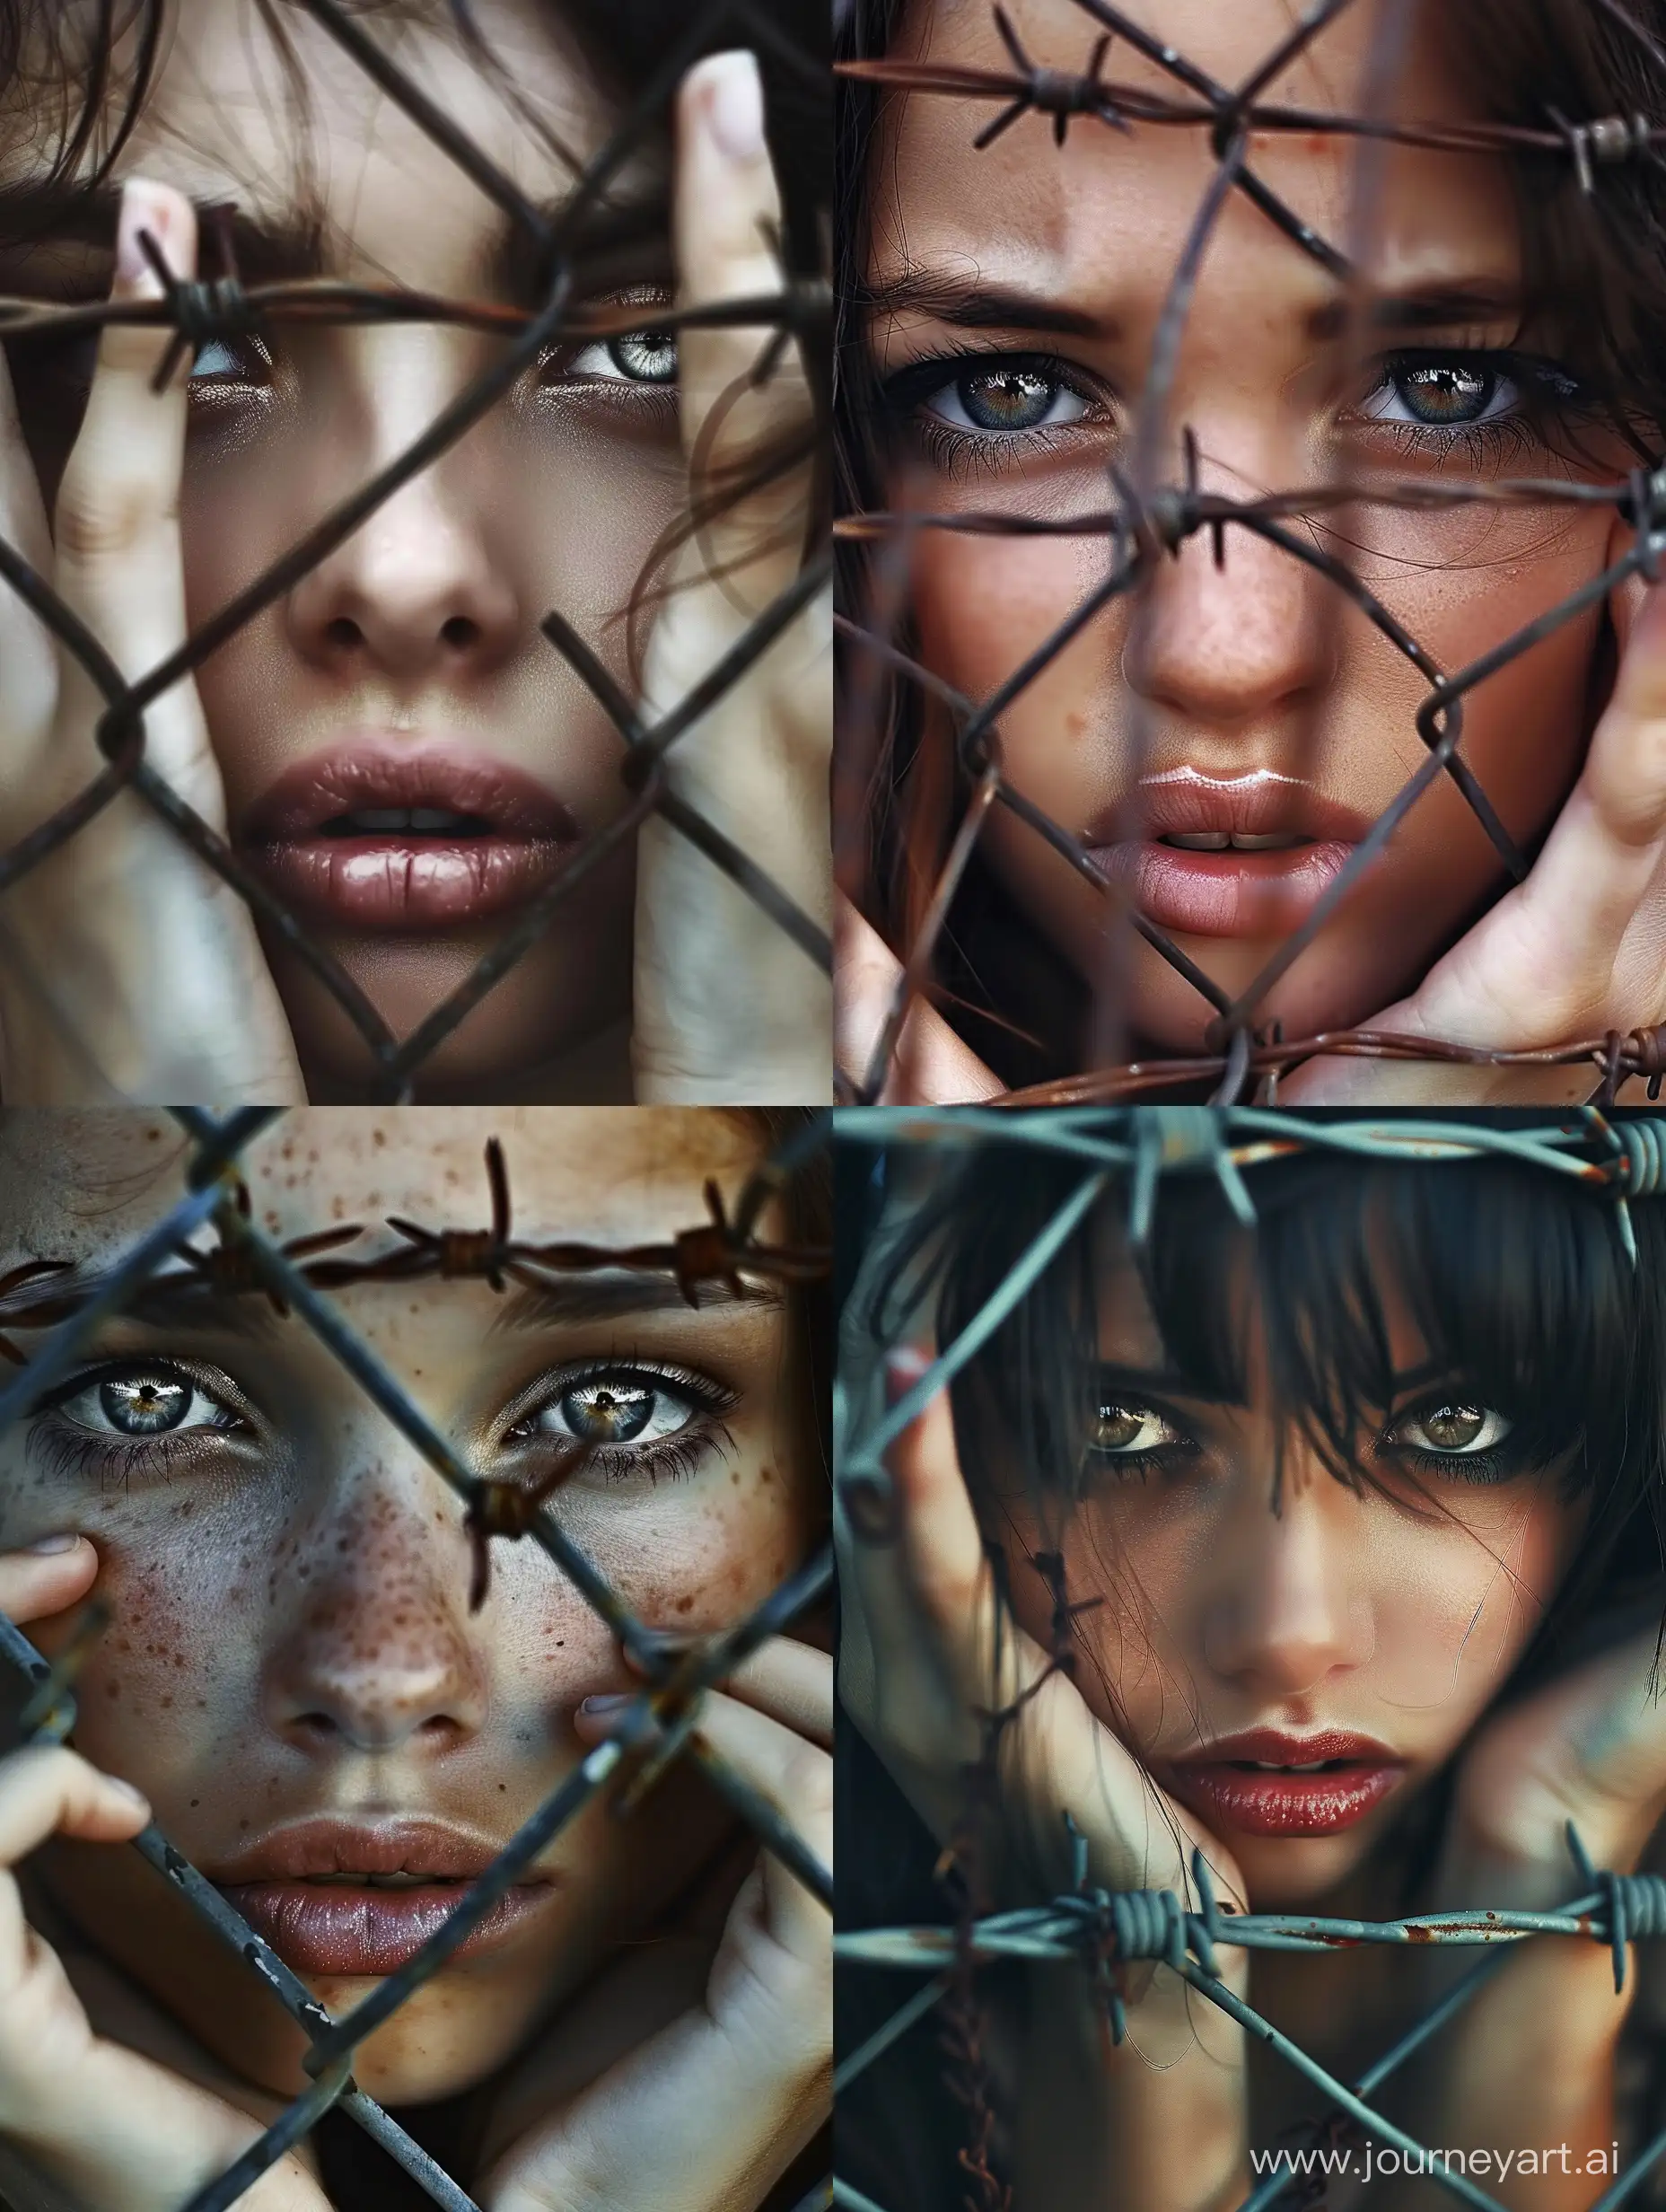 a girl, beautiful eyes, thick lip, only face, face magazine, face up, sad, behind barbed wire chainlink fence, fingers reaching through fence 
